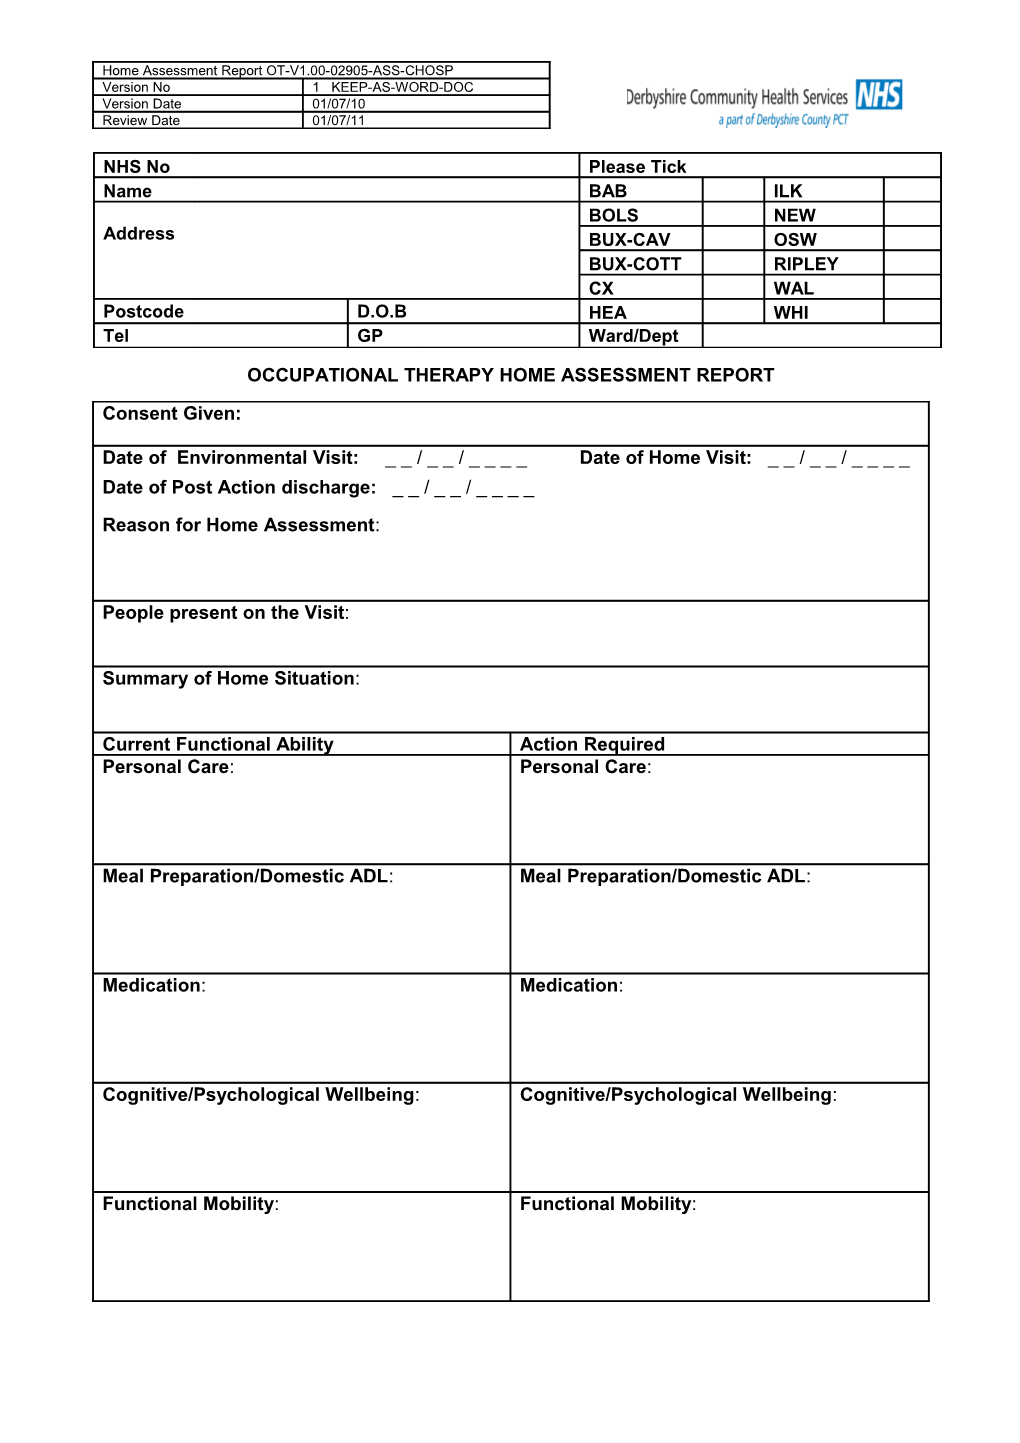 Occupational Therapy Home Assessment Report